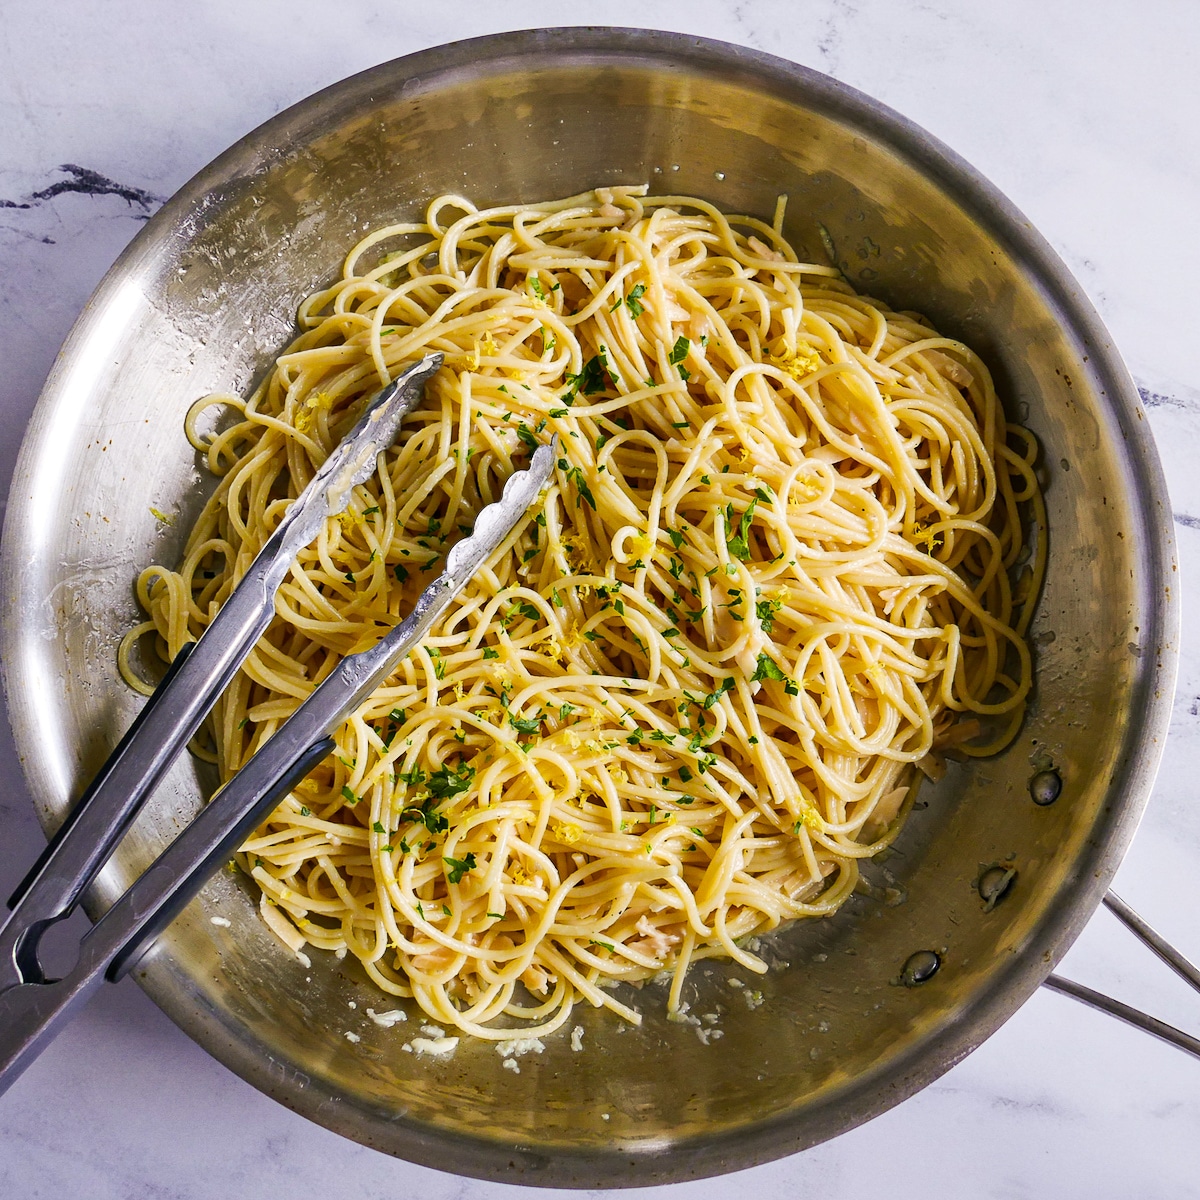 Noodles tossed with garlic butter, Parmesan, and lemon in a skillet.